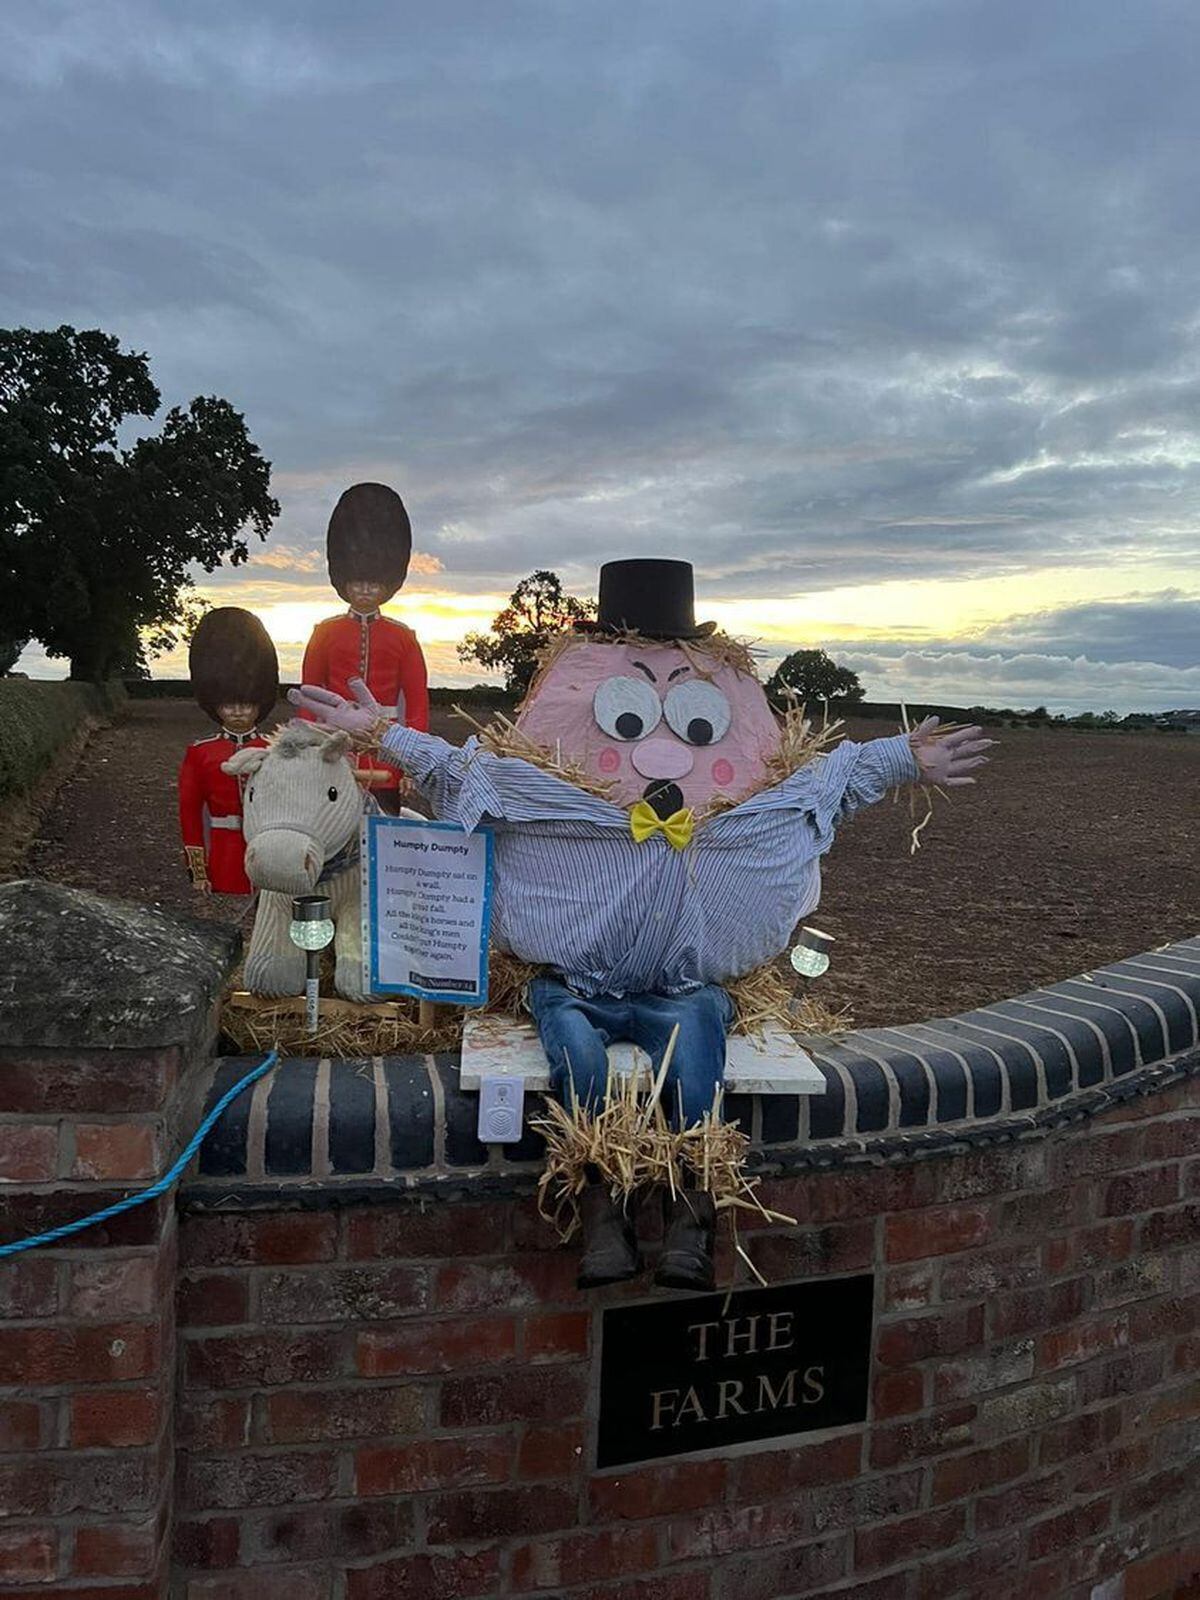 One of the scarecrows in Whixhall